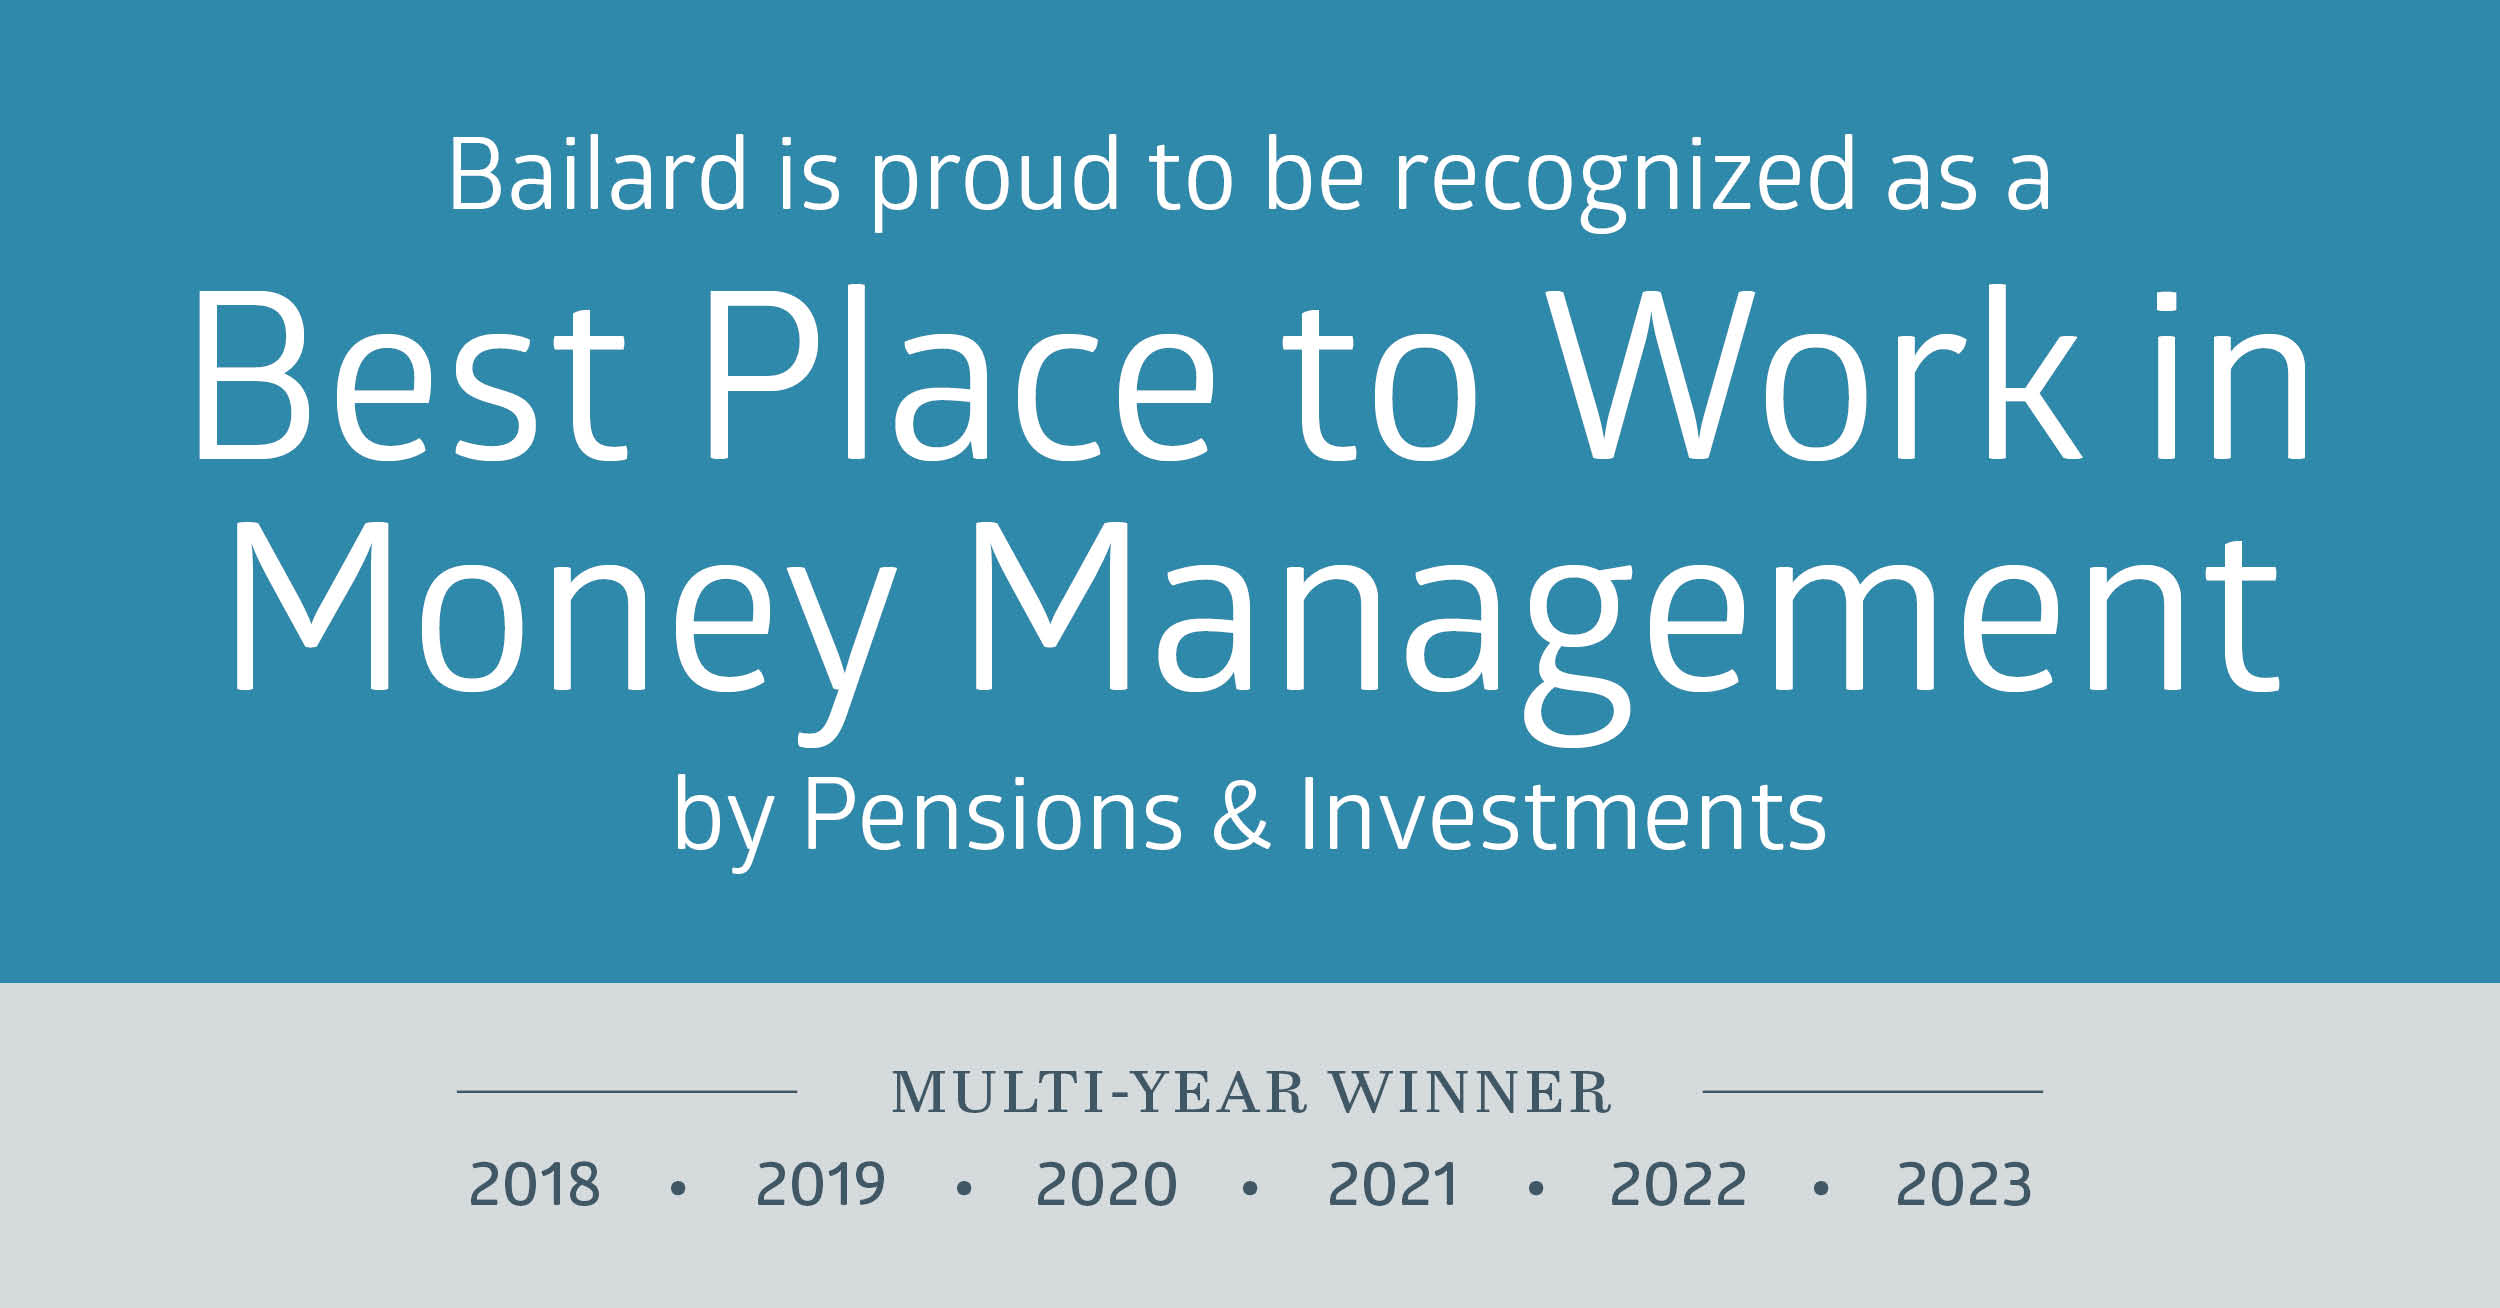 Image: Bailard is proud to be recognized as a Best Place to Work in Money Management by Pensions & Investments